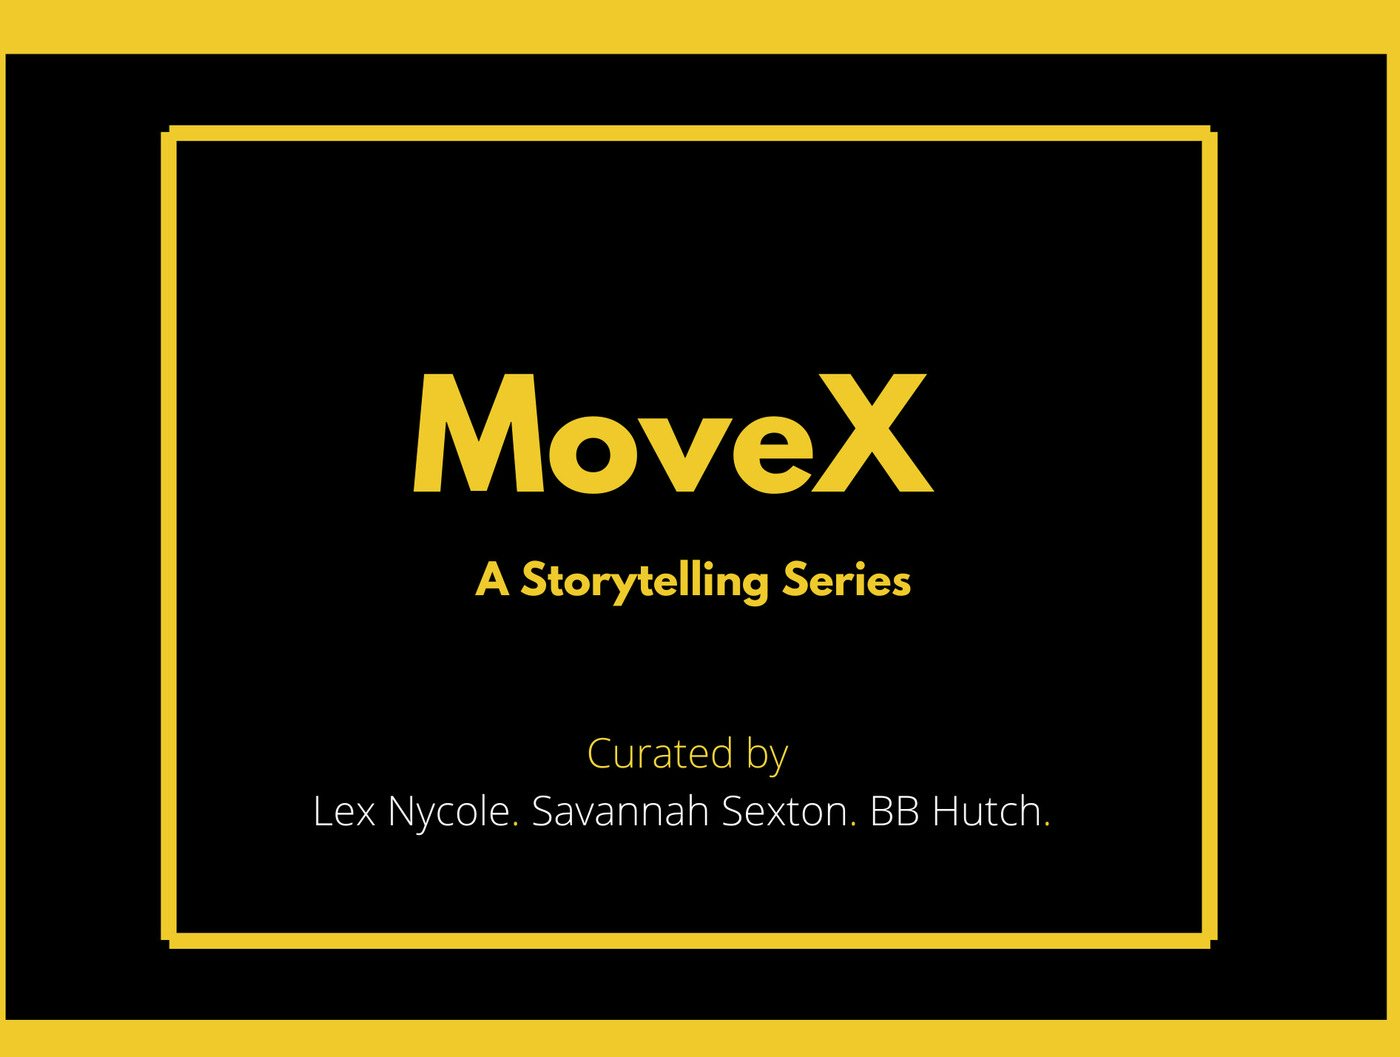 Moxe X: a Storytelling Series